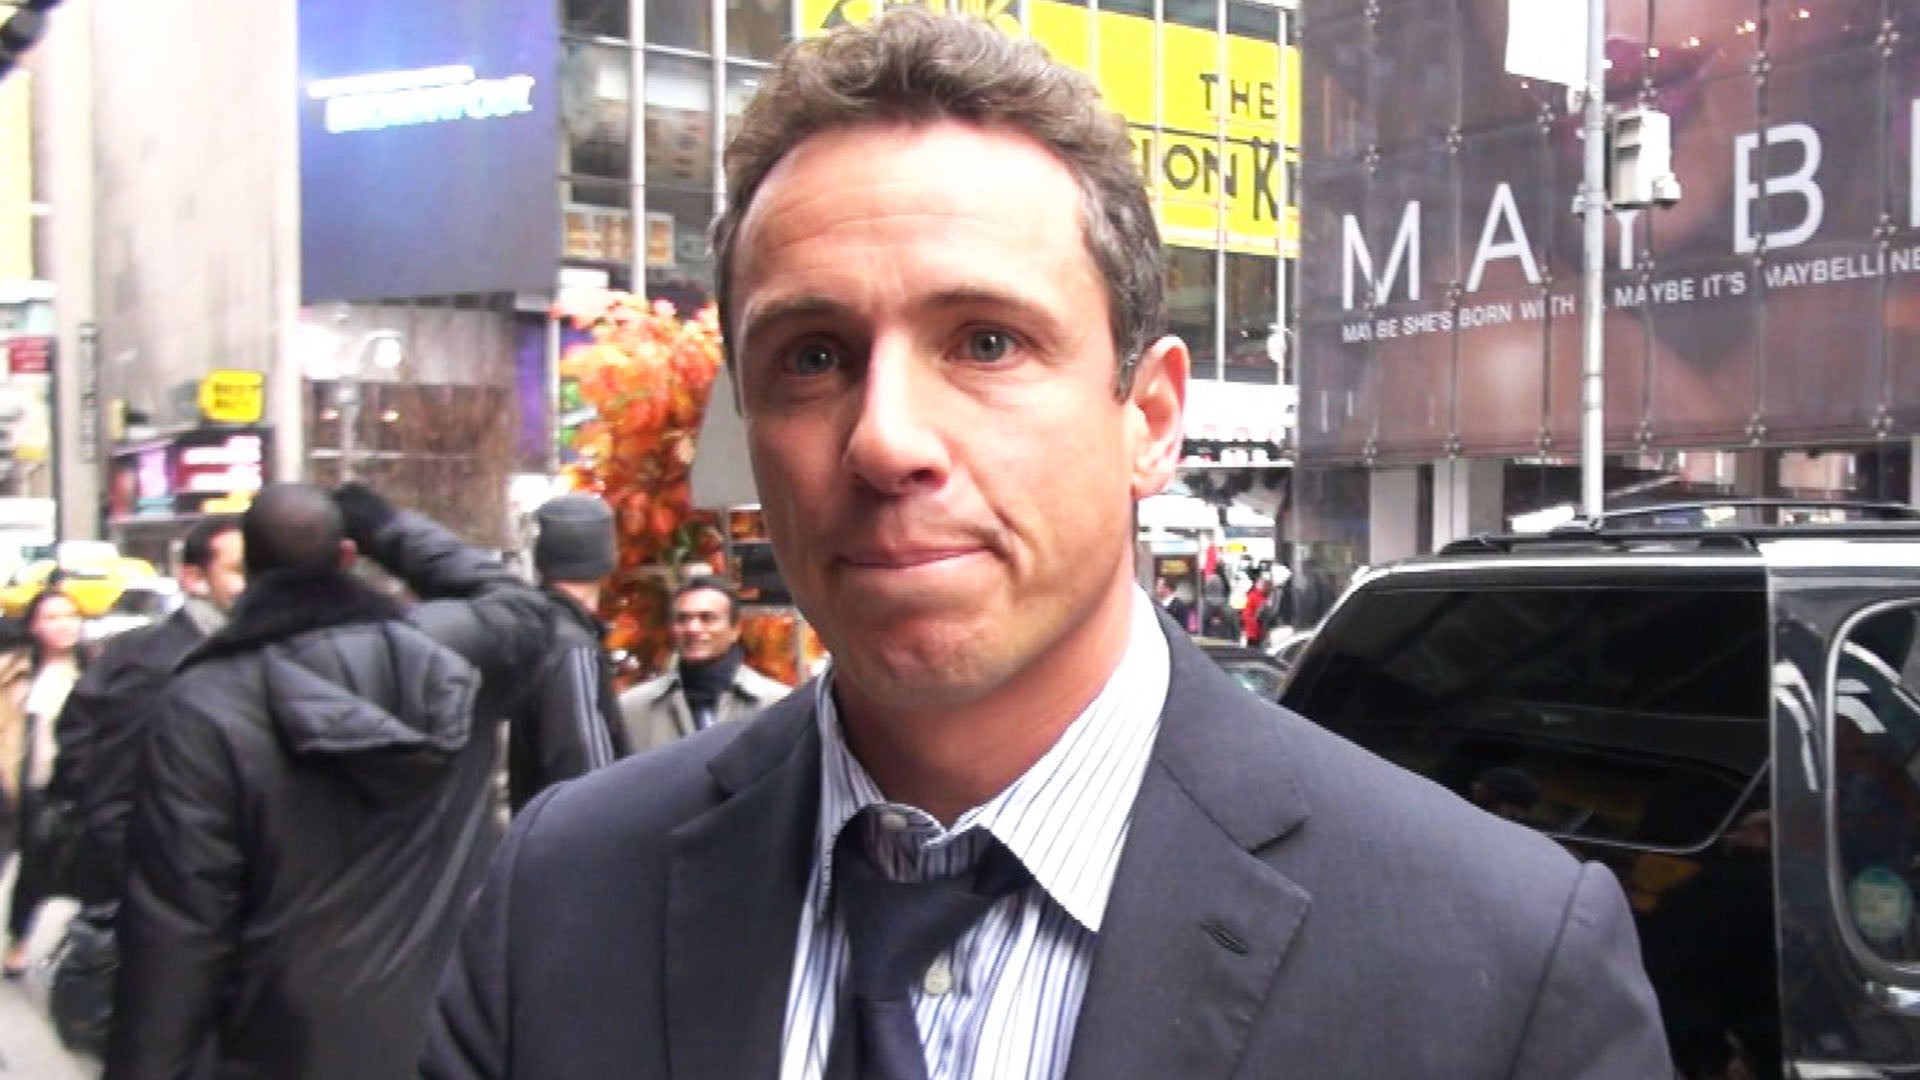 Chris Cuomo Allegedly Sexually Assaulted Young Woman in His Office in 2011